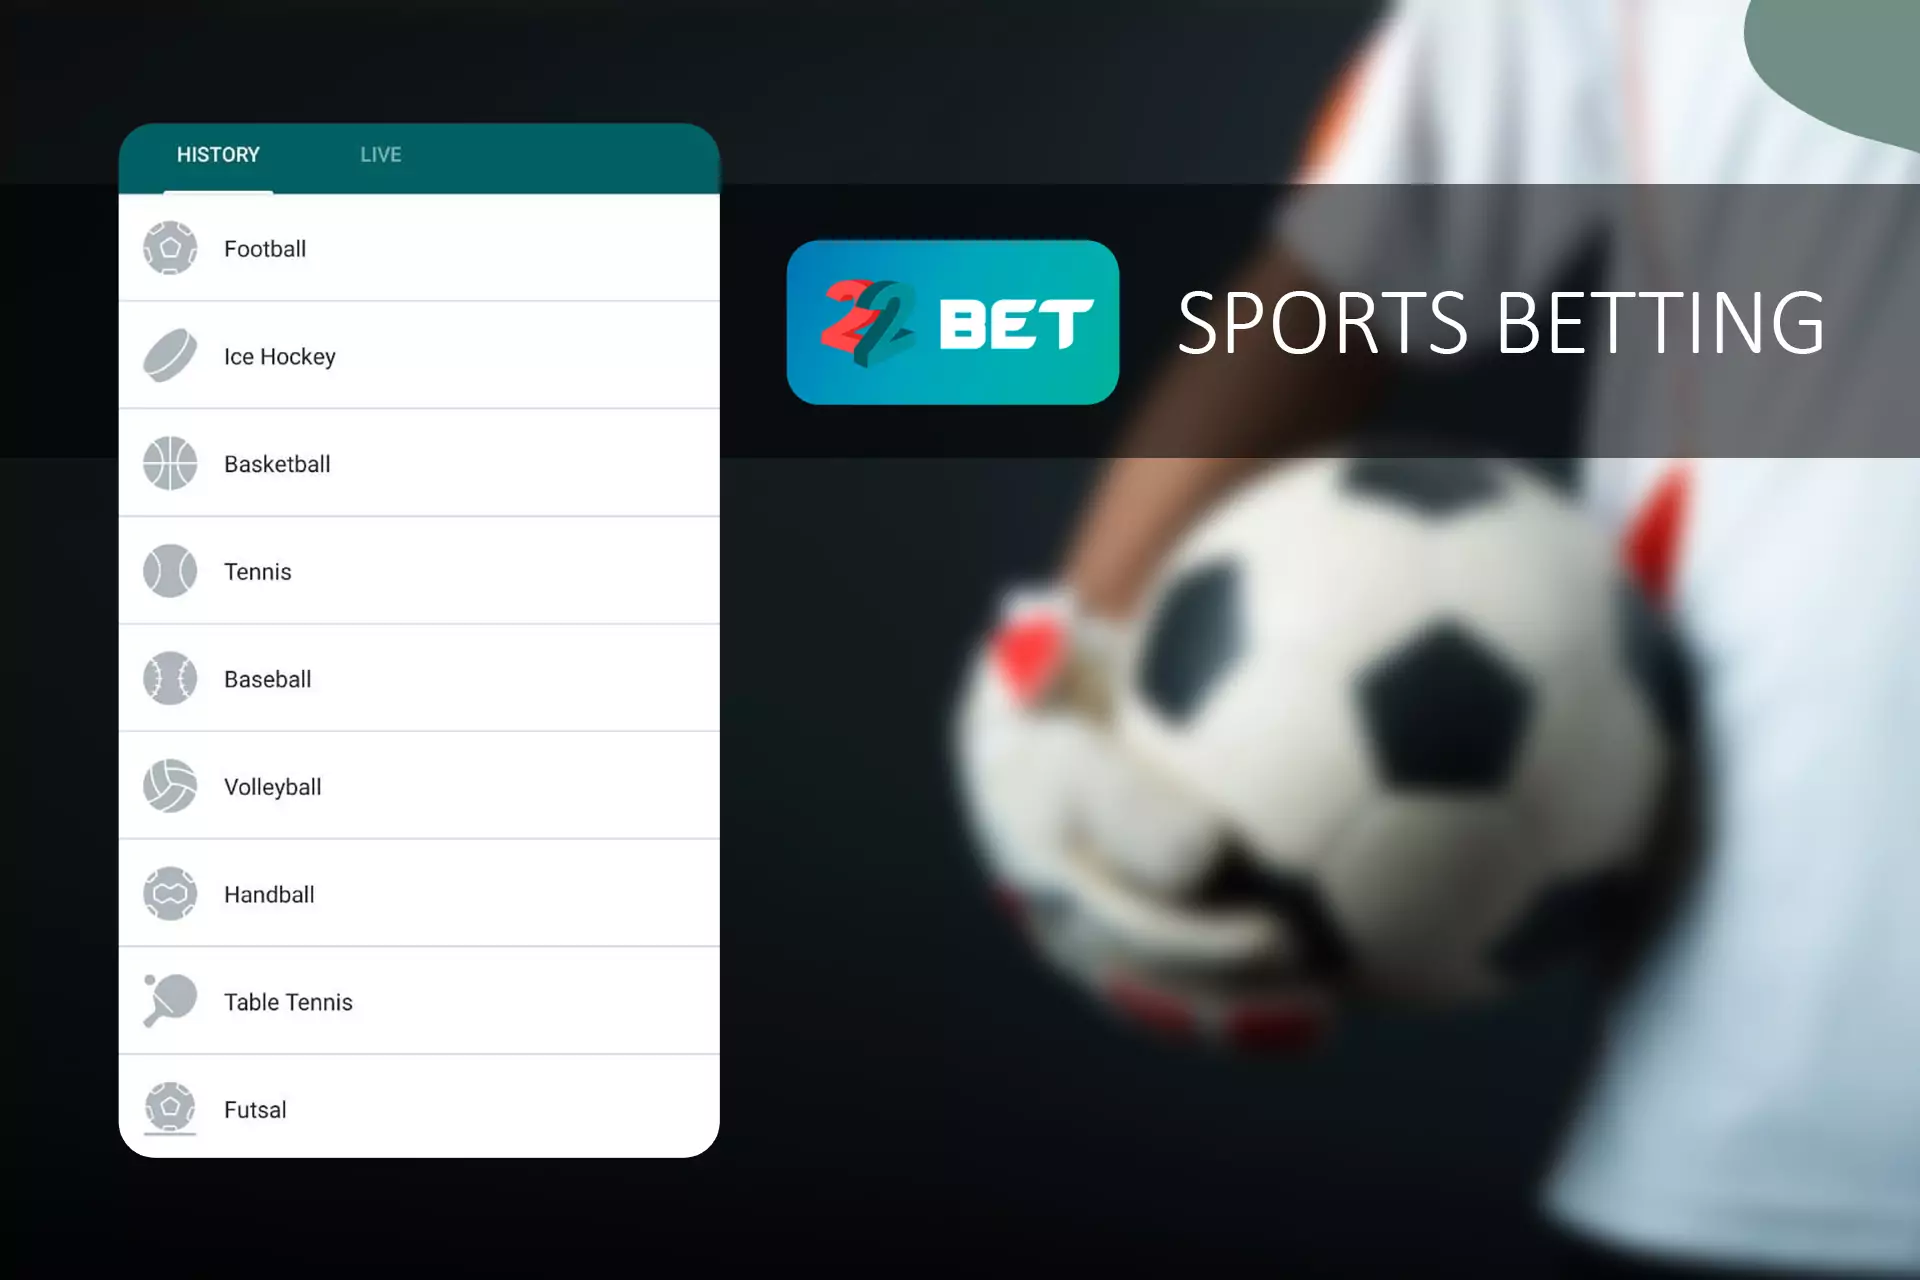 In a sportsbook, users can place bets on different types of sport.